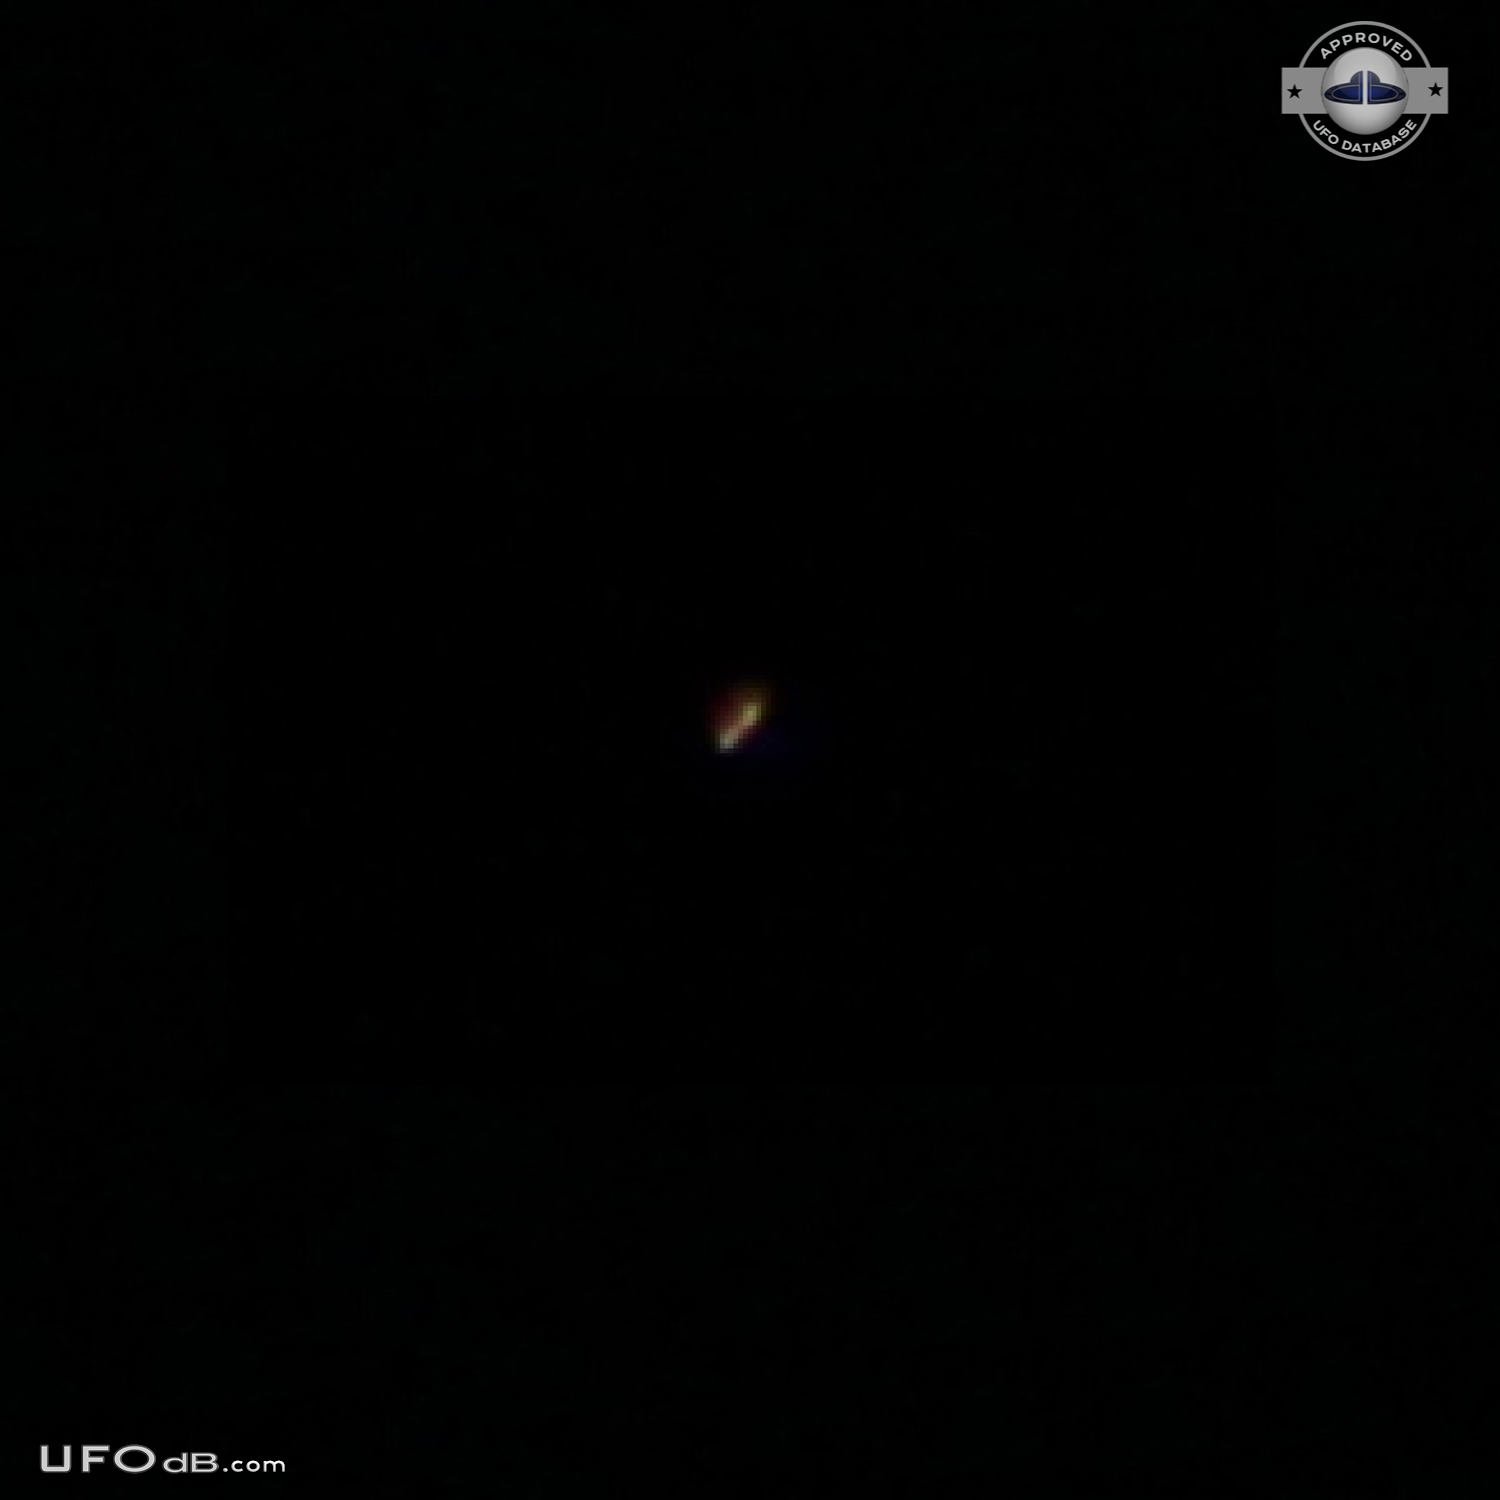 Bright mufti-colored flashing pulsating UFO on pictures - Florida 2012 UFO Picture #524-2